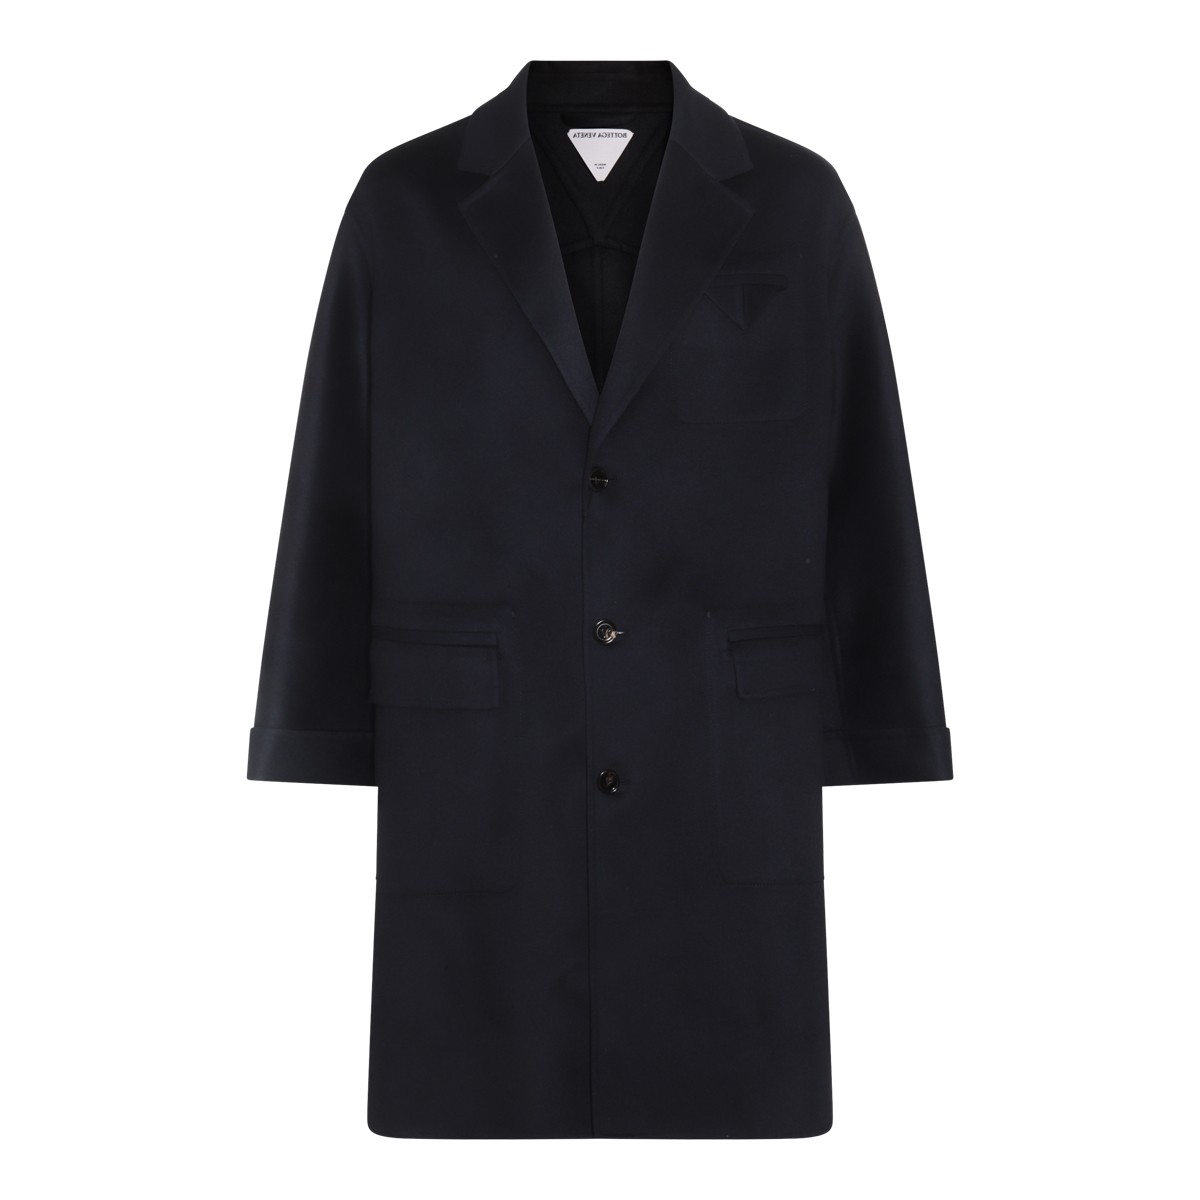 NAVY WOOL AND CASHMERE COAT